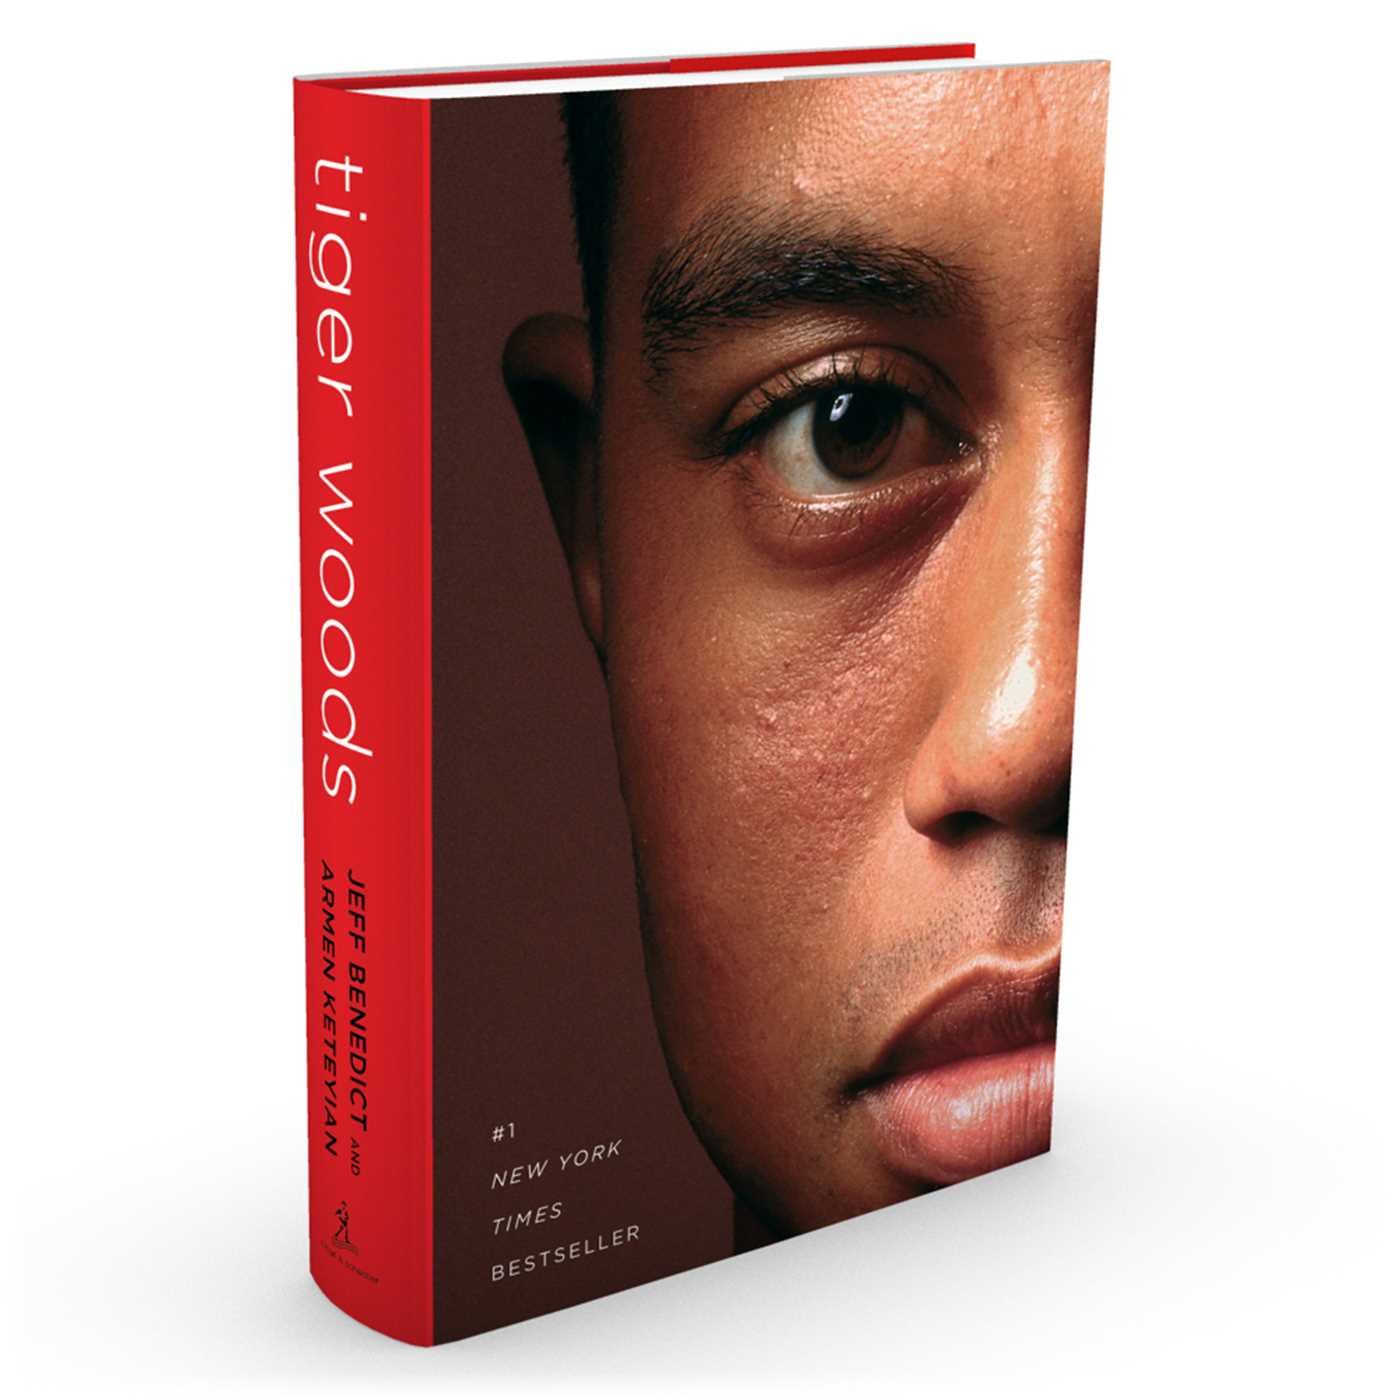 A book cover for Tiger Woods